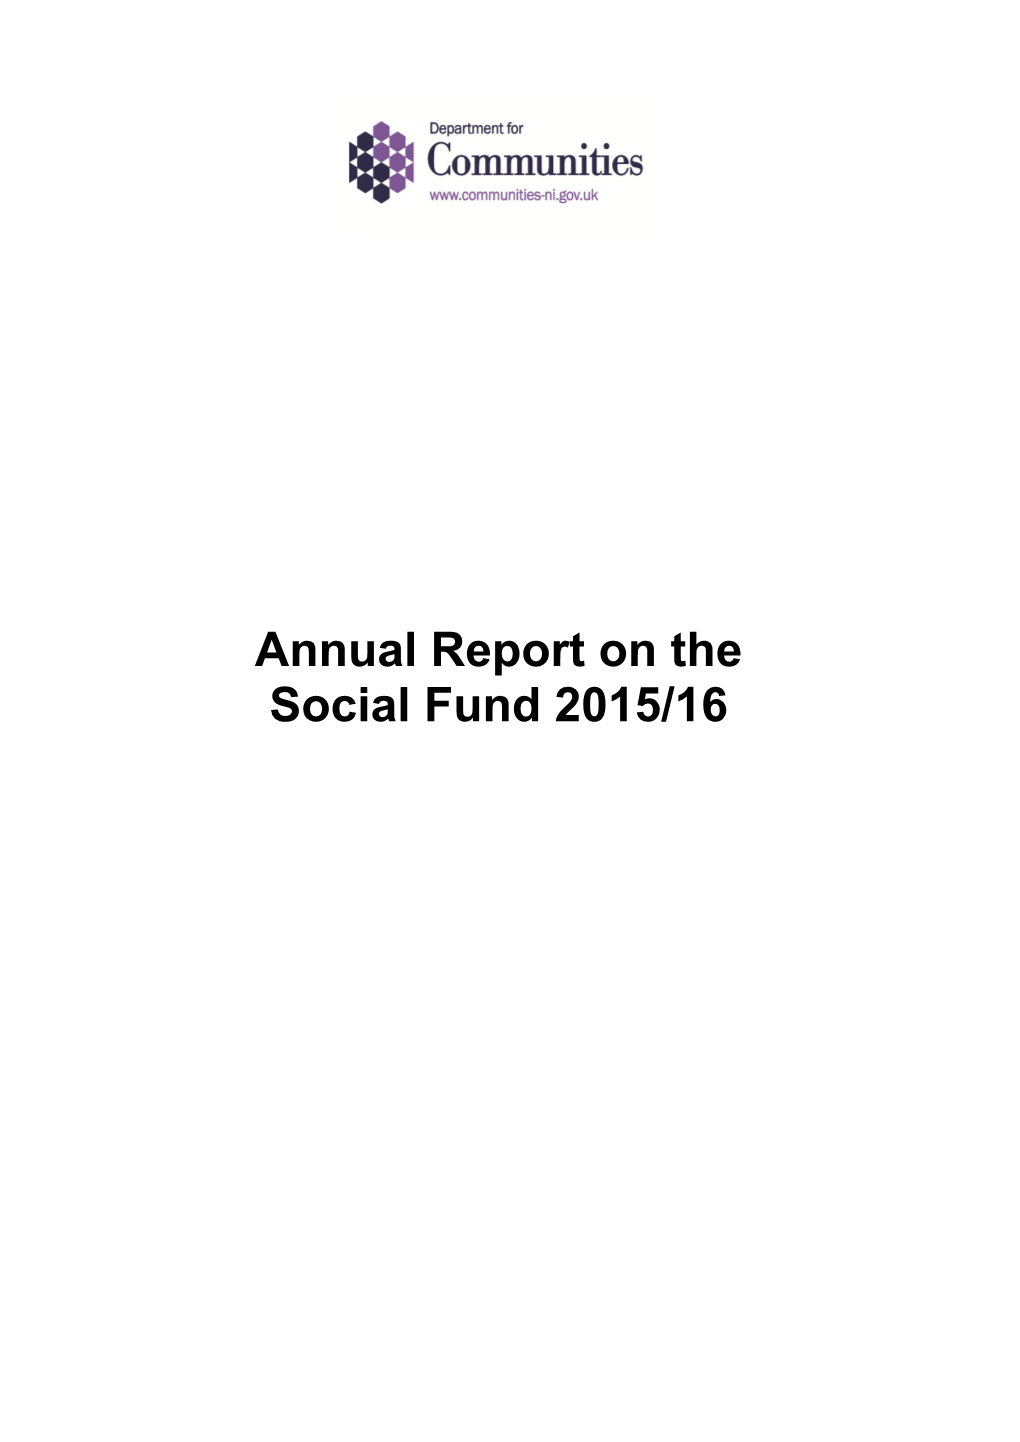 Annual Report on the Social Fund 2015/16